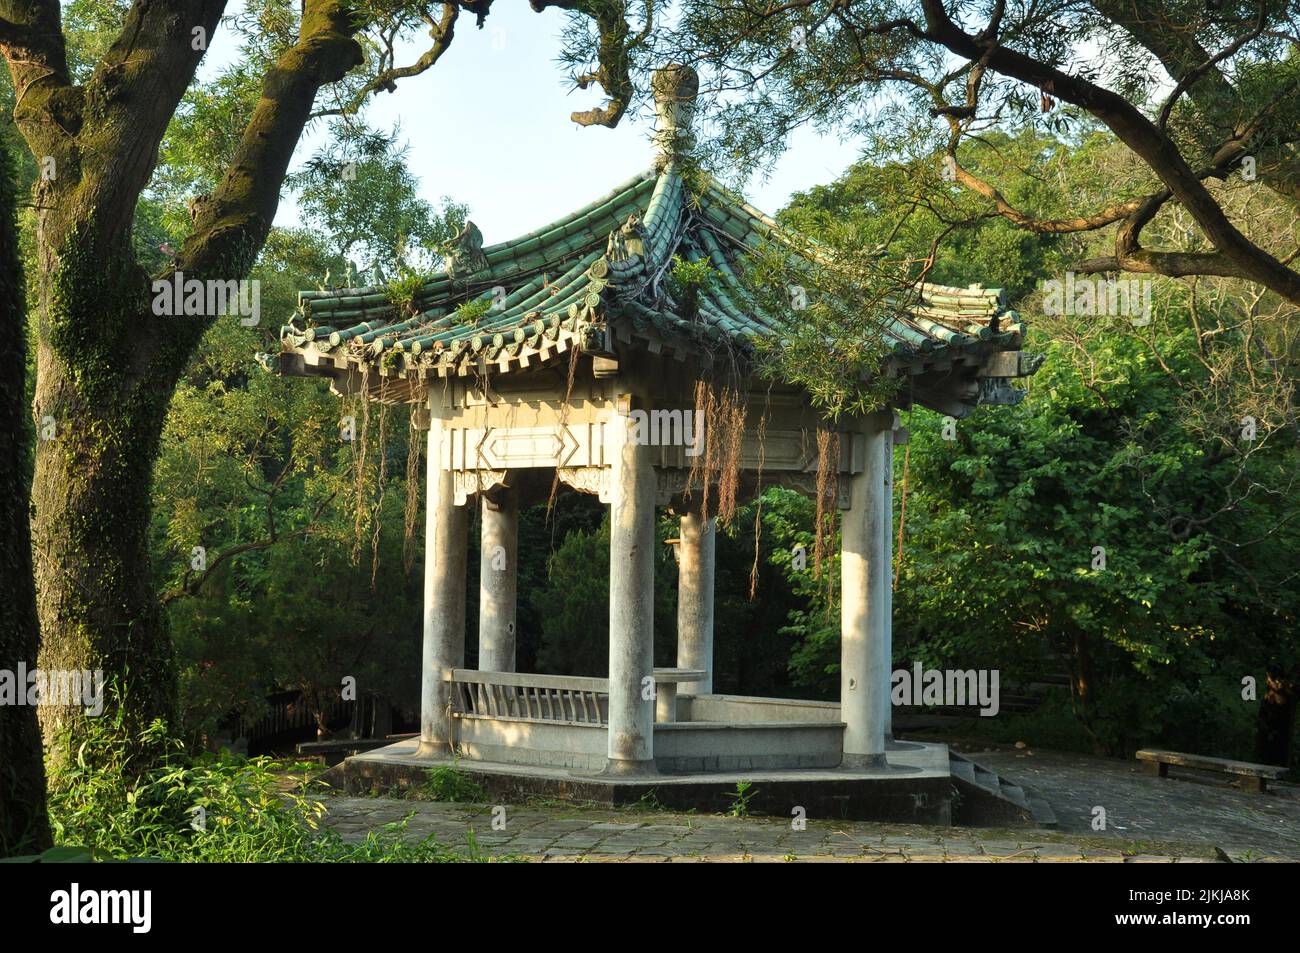 A scenic view of a Chinese pavilion with columns and a green rooftop surrounded by greenery in Taipei, Taiwan Stock Photo